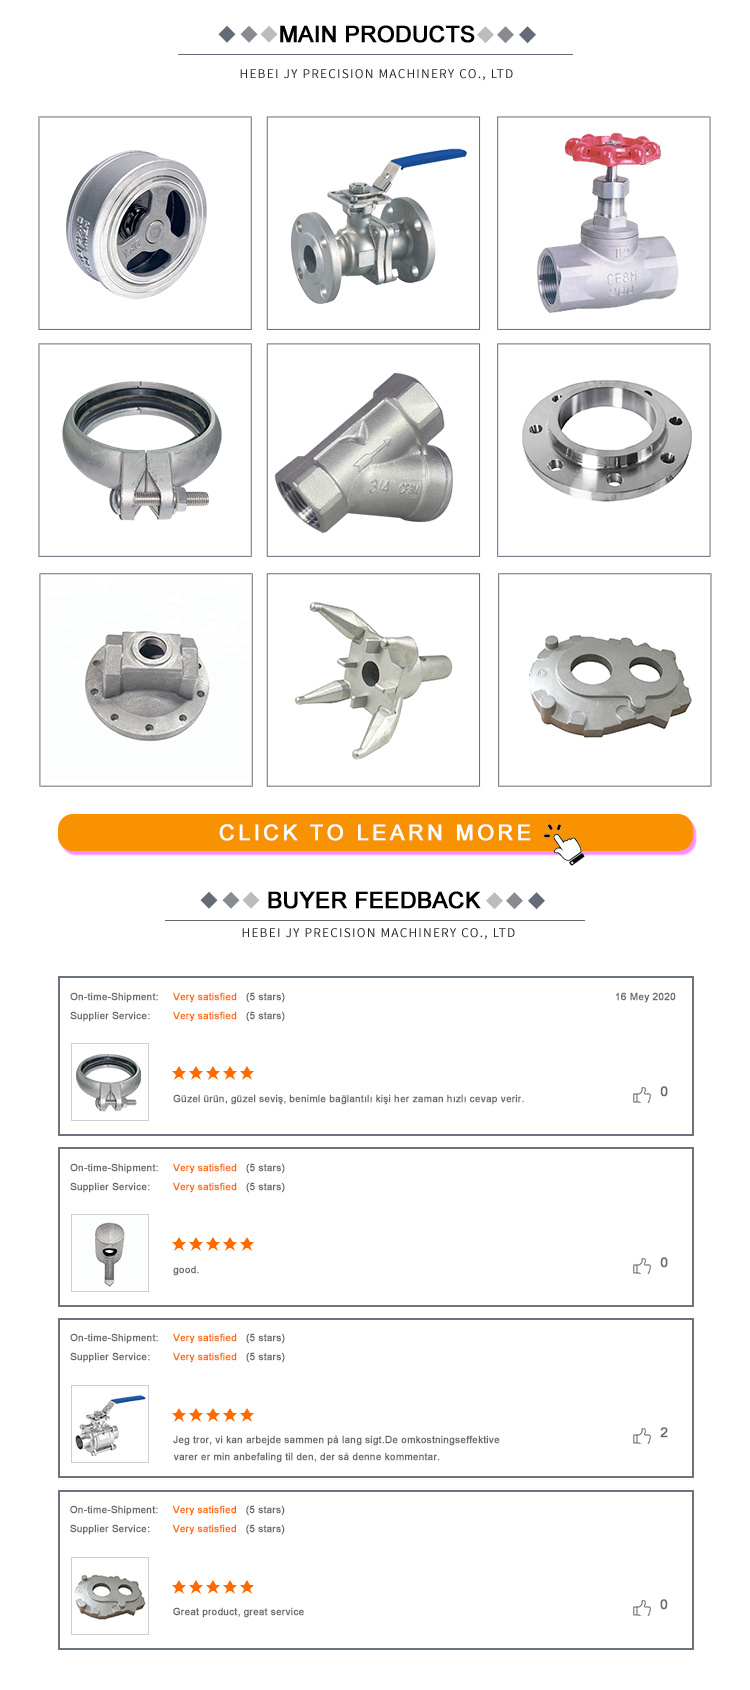 High Precision Lost Wax Tool Investment Casting Stainless Steel Products